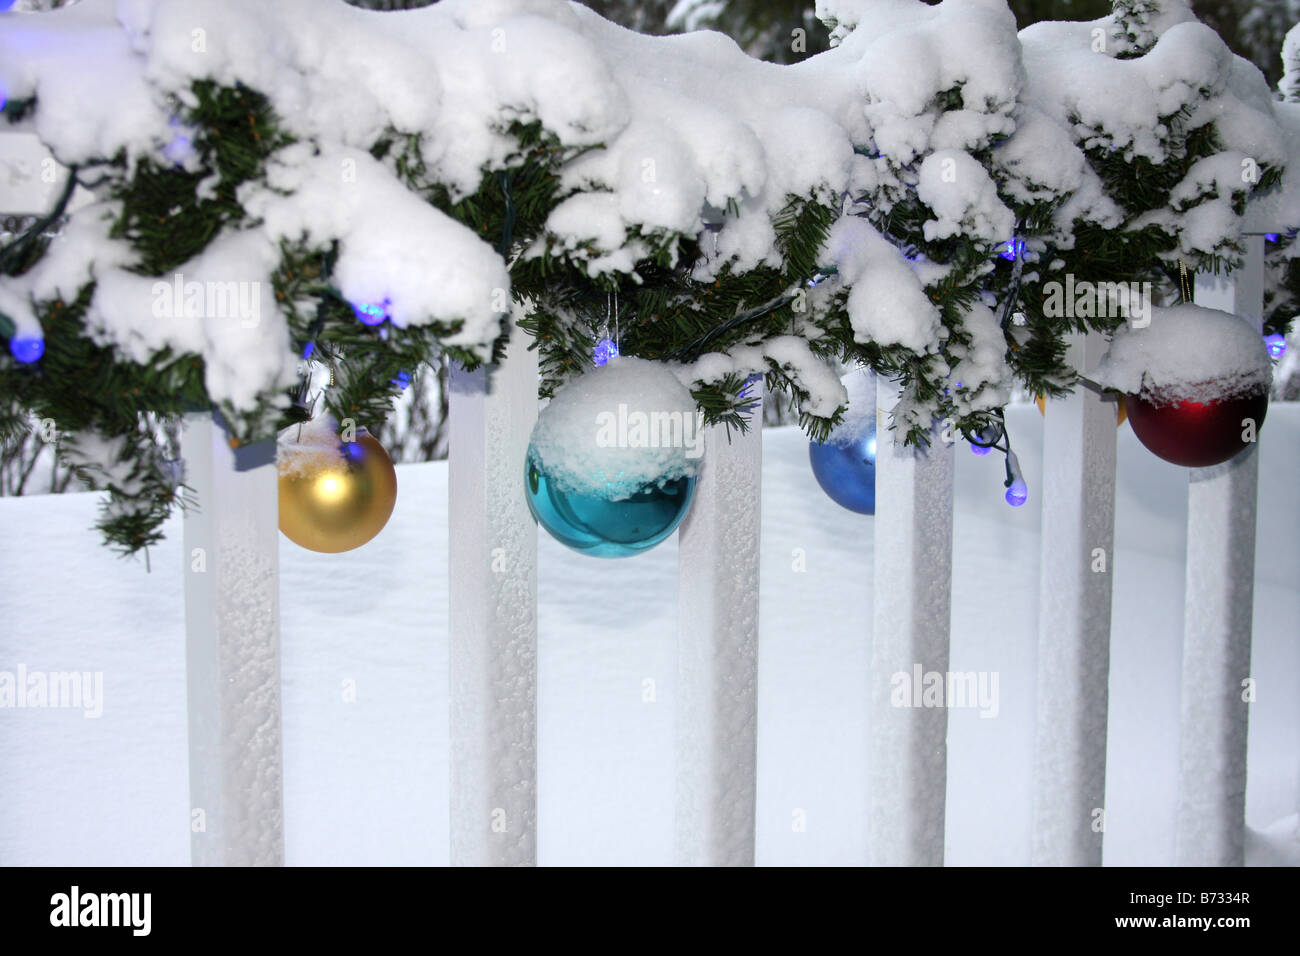 A porch with Christmas decorations lights and ornaments covered in snow Stock Photo